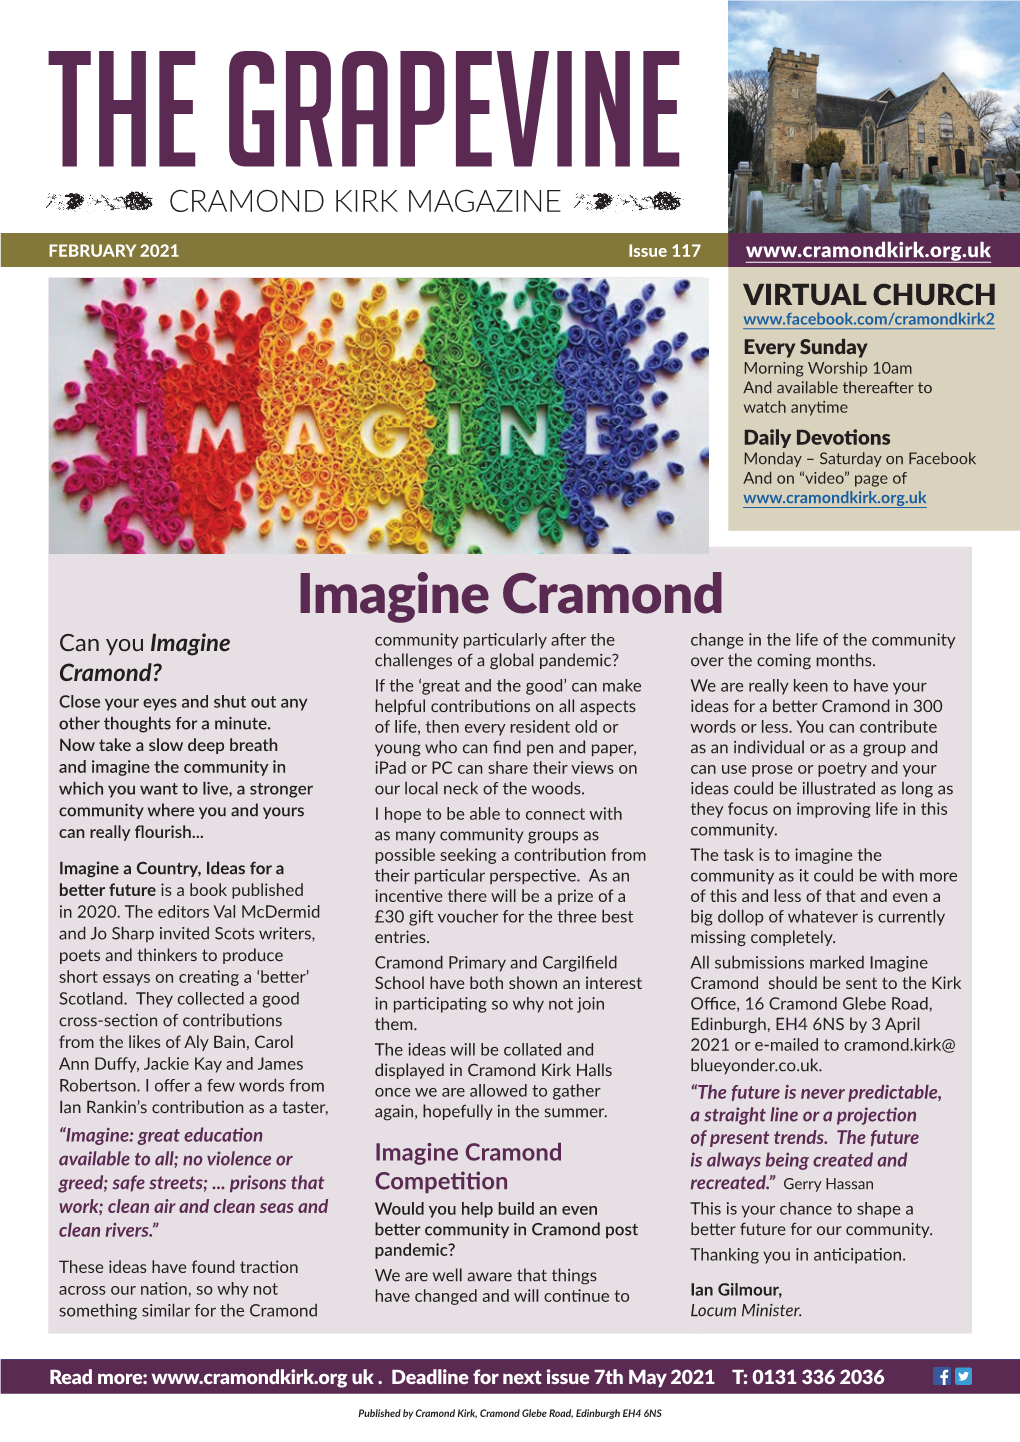 Imagine Cramond Can You Imagine Community Particularly After the Change in the Life of the Community Challenges of a Global Pandemic? Over the Coming Months